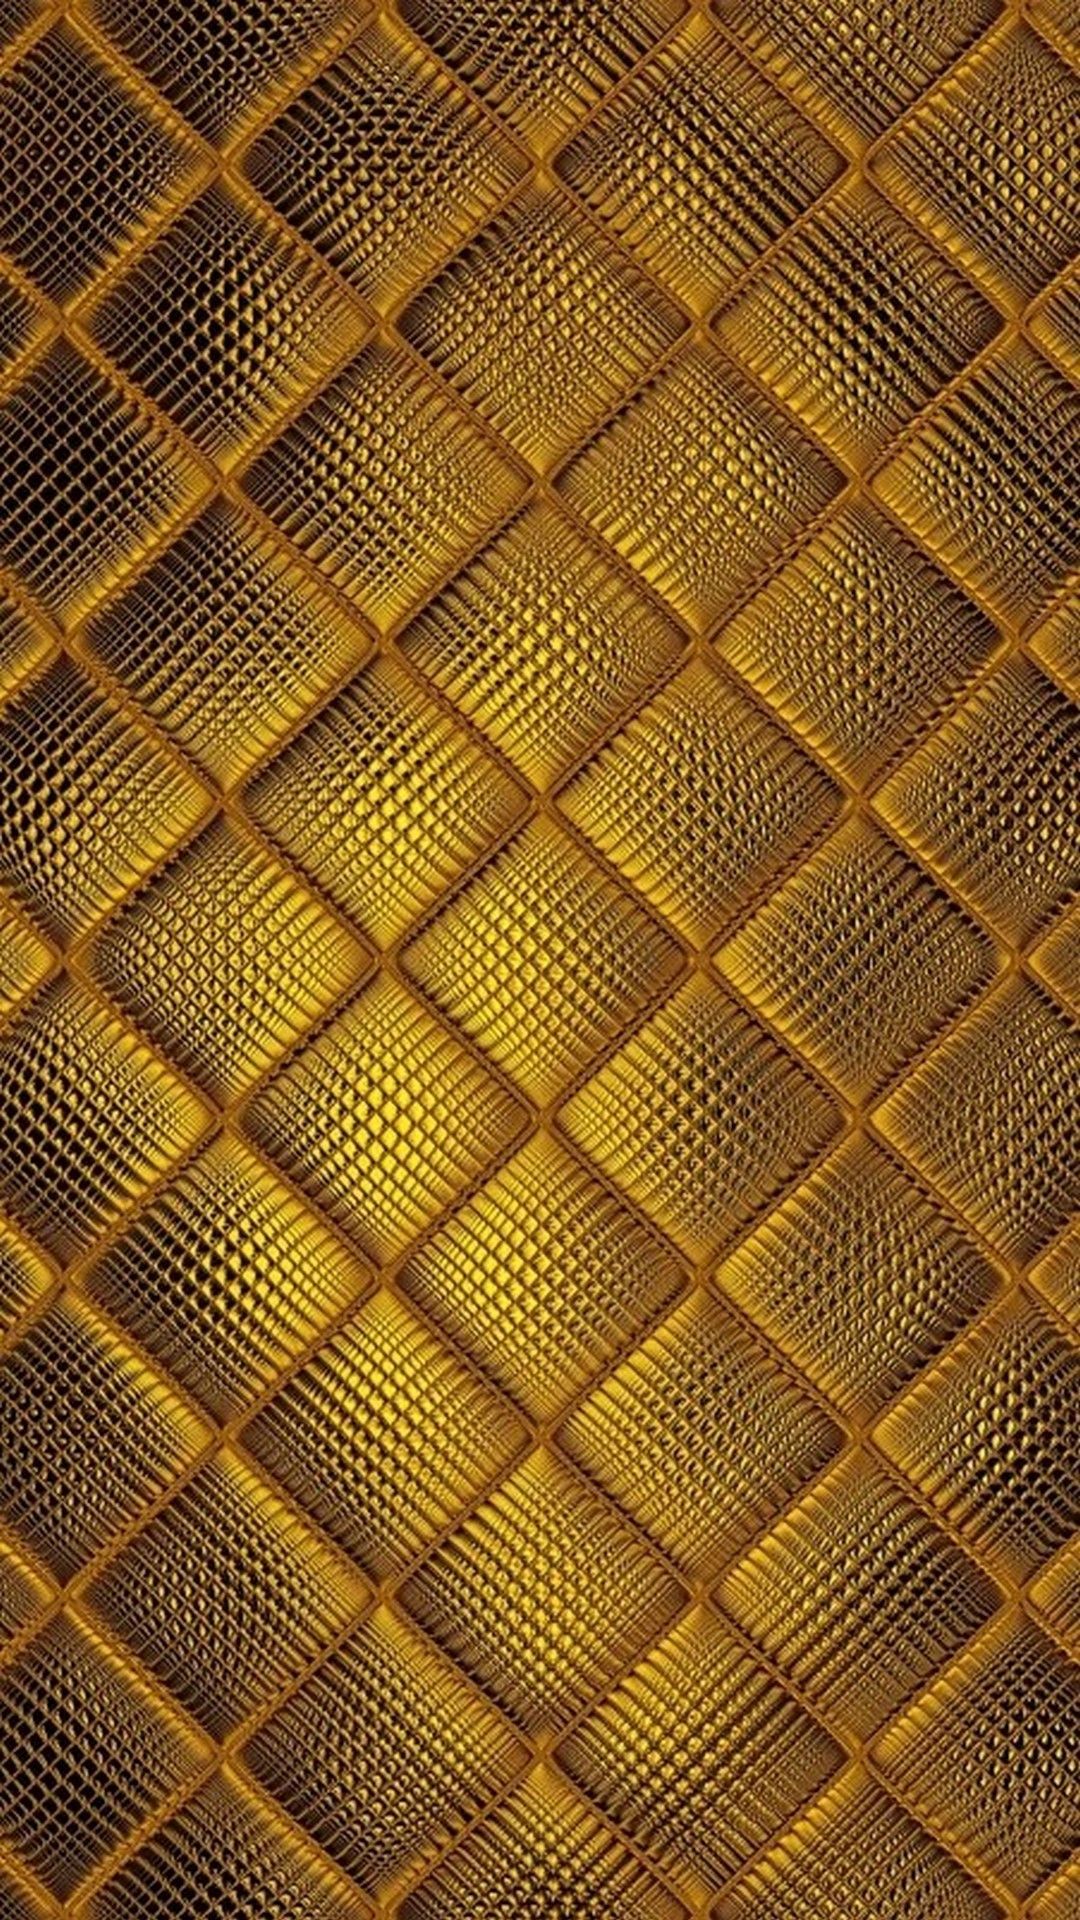 Wallpaper Gold Pattern iPhone. Android wallpaper, Gold wallpaper, Best iphone wallpaper